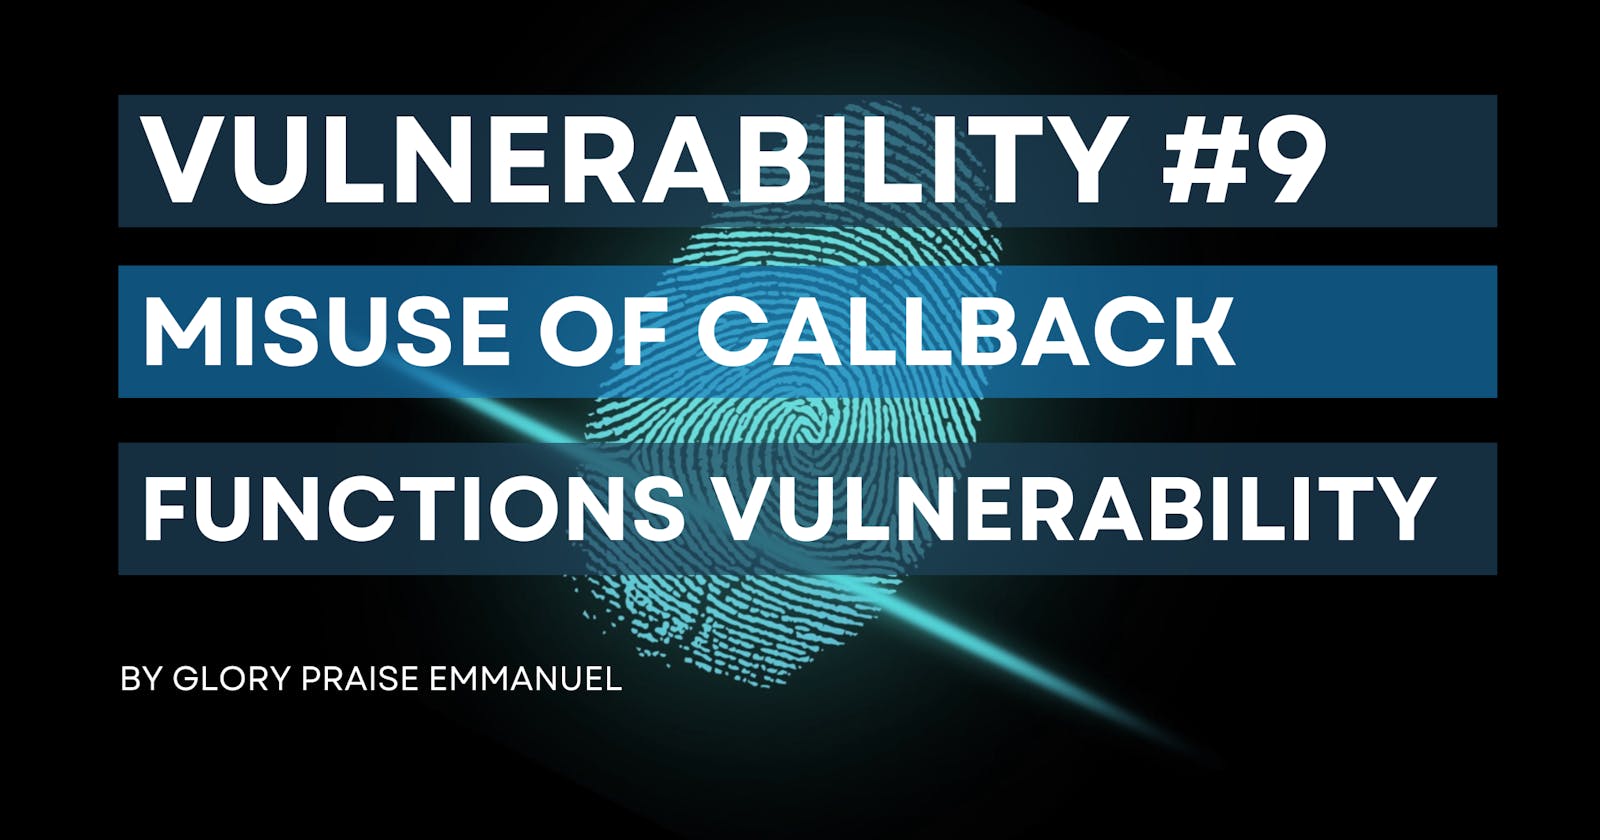 Vulnerability #9 - Misuse of Callback Functions Vulnerability